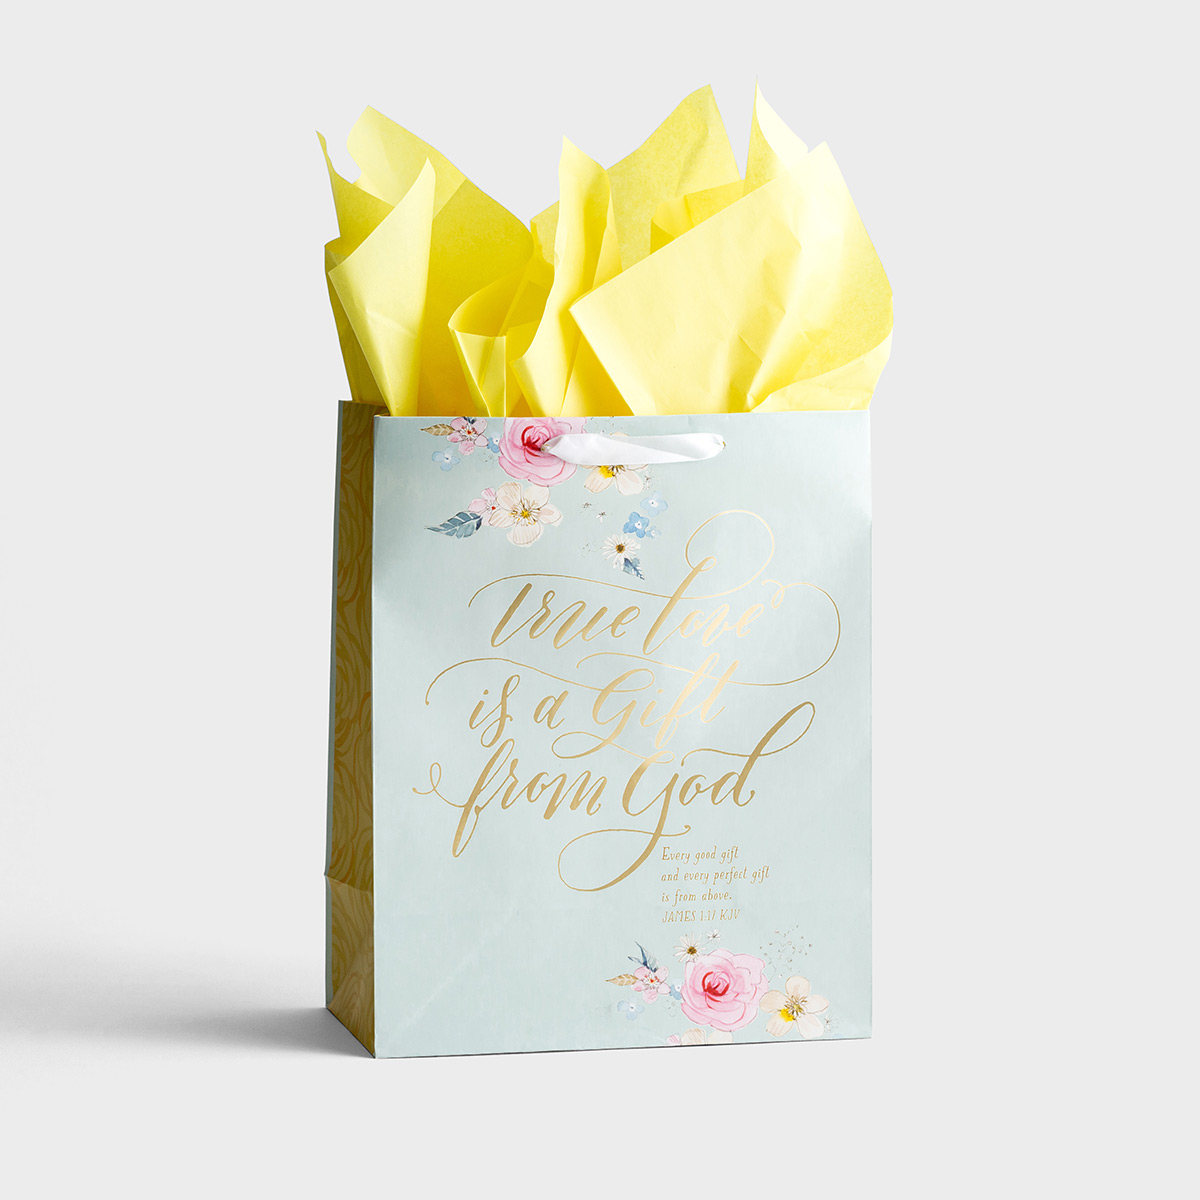 True Love Is a Gift - Large Gift Bag with Tissue